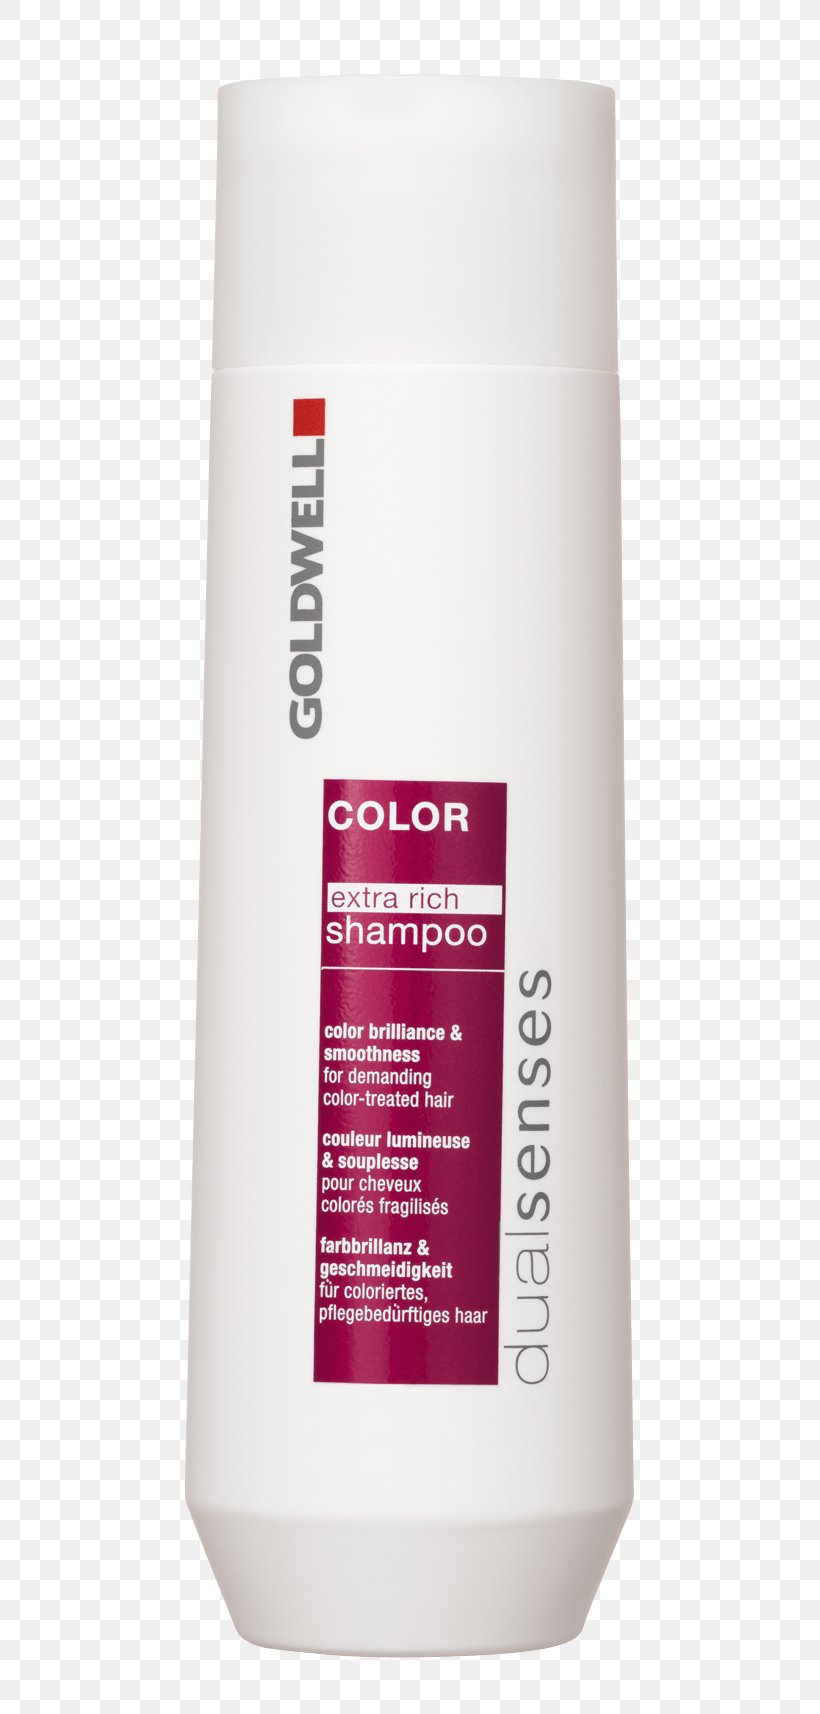 Lotion Hair Conditioner Hair Care Shampoo Color, PNG, 620x1714px, Lotion, Color, Hair, Hair Care, Hair Conditioner Download Free